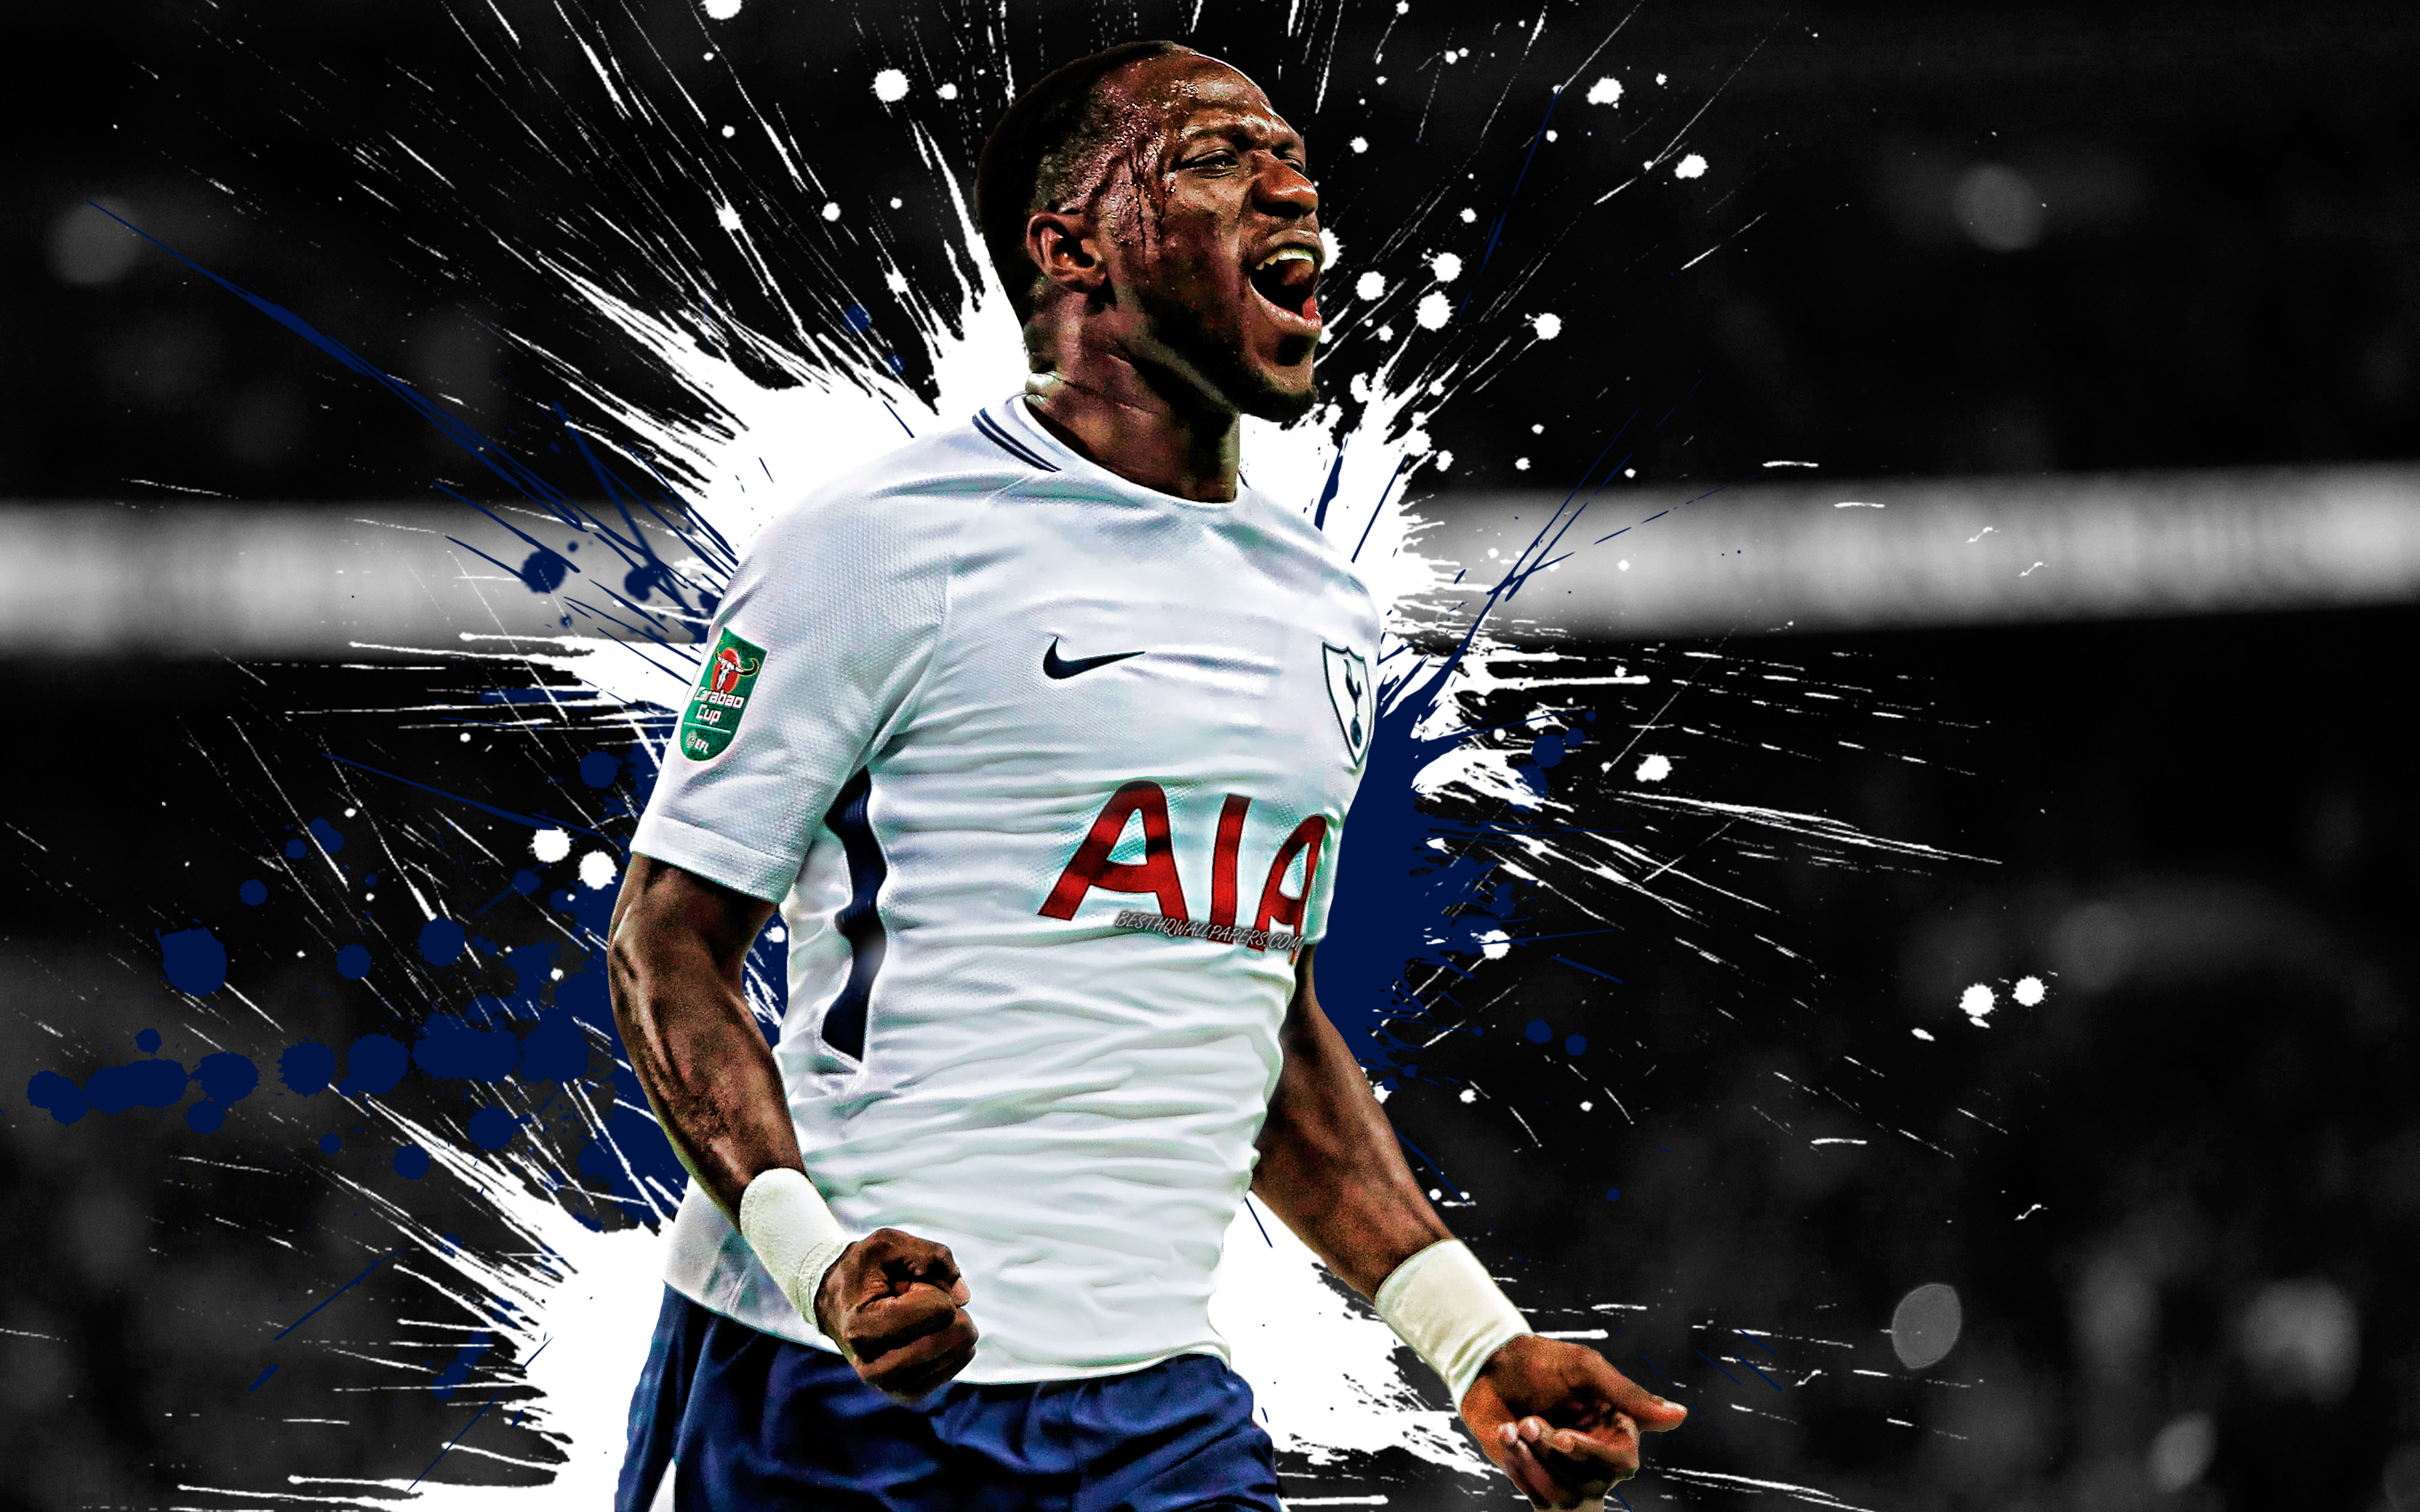 Moussa Sissoko, 4k, French Football Player, Tottenham - Moussa Sissoko Wallpaper Hd - HD Wallpaper 